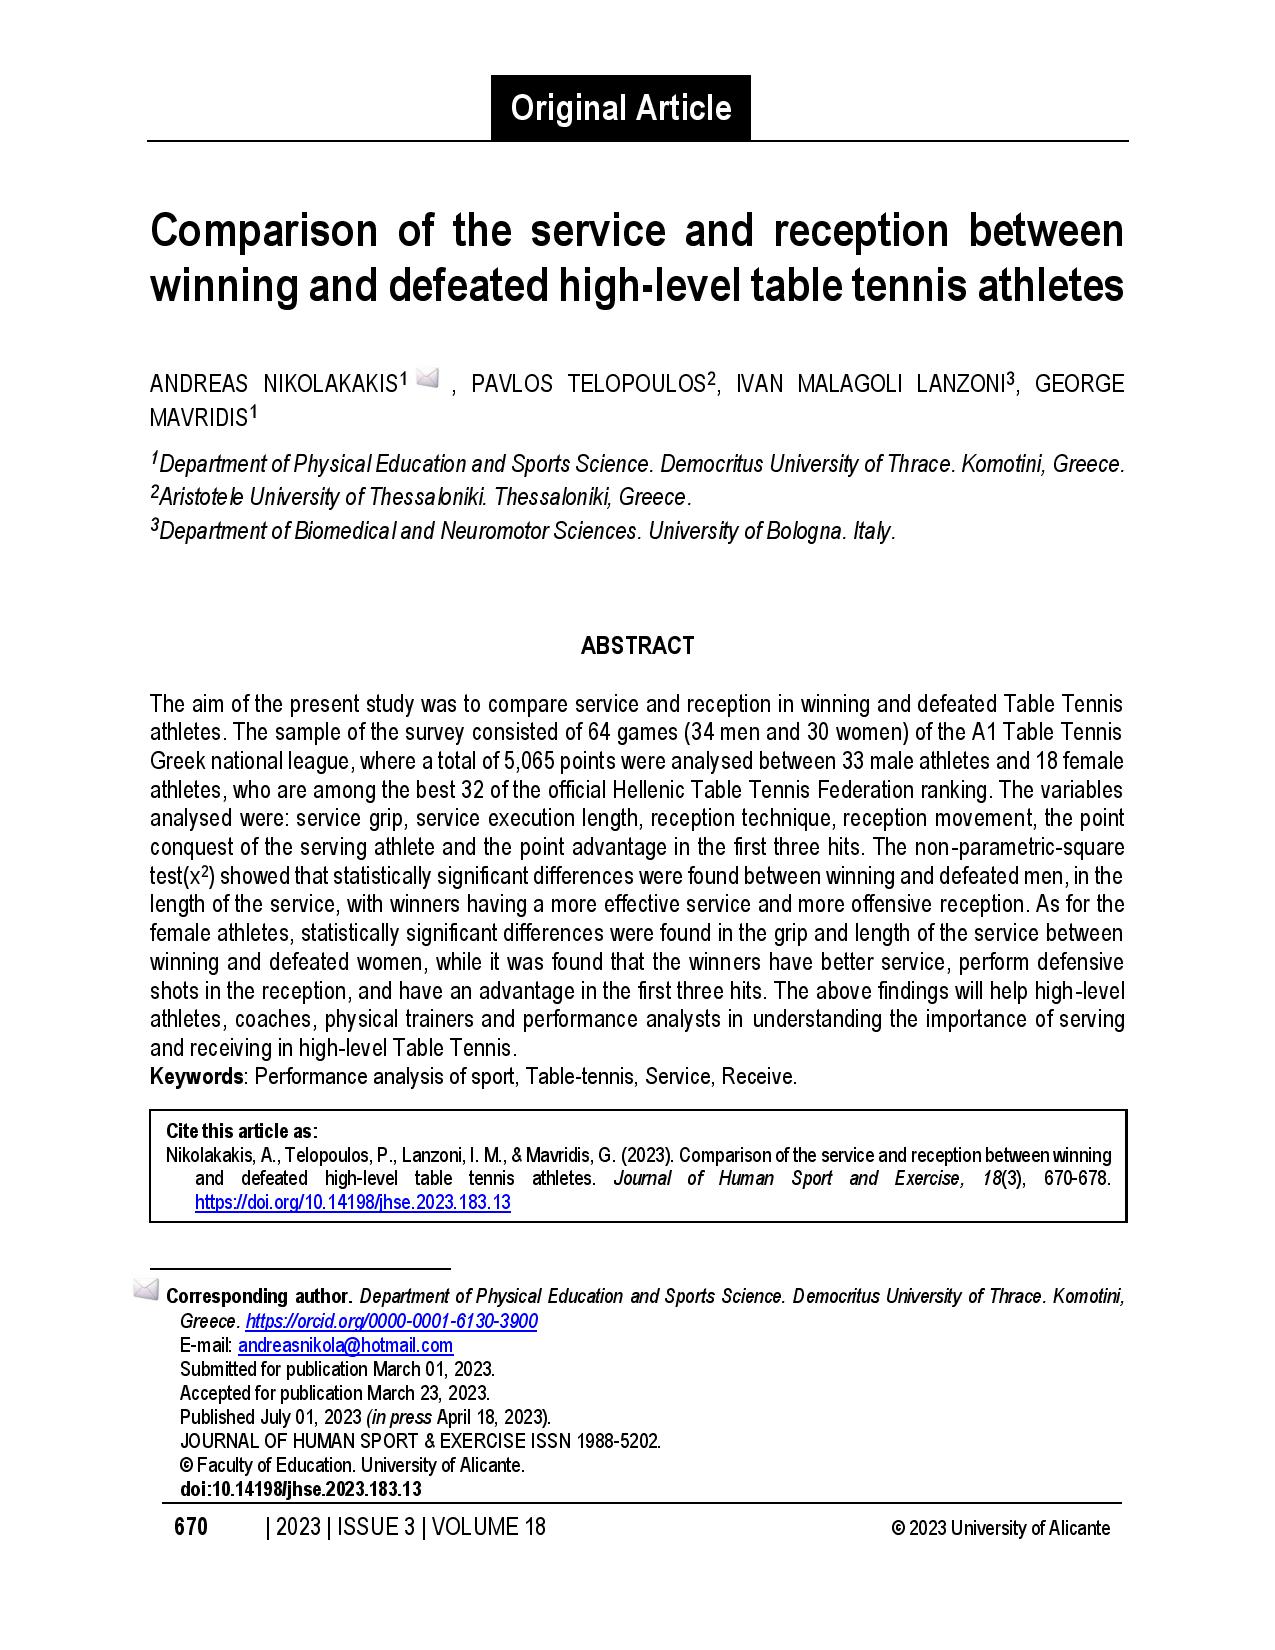 Comparison of the service and reception between winning and defeated high-level table tennis athletes